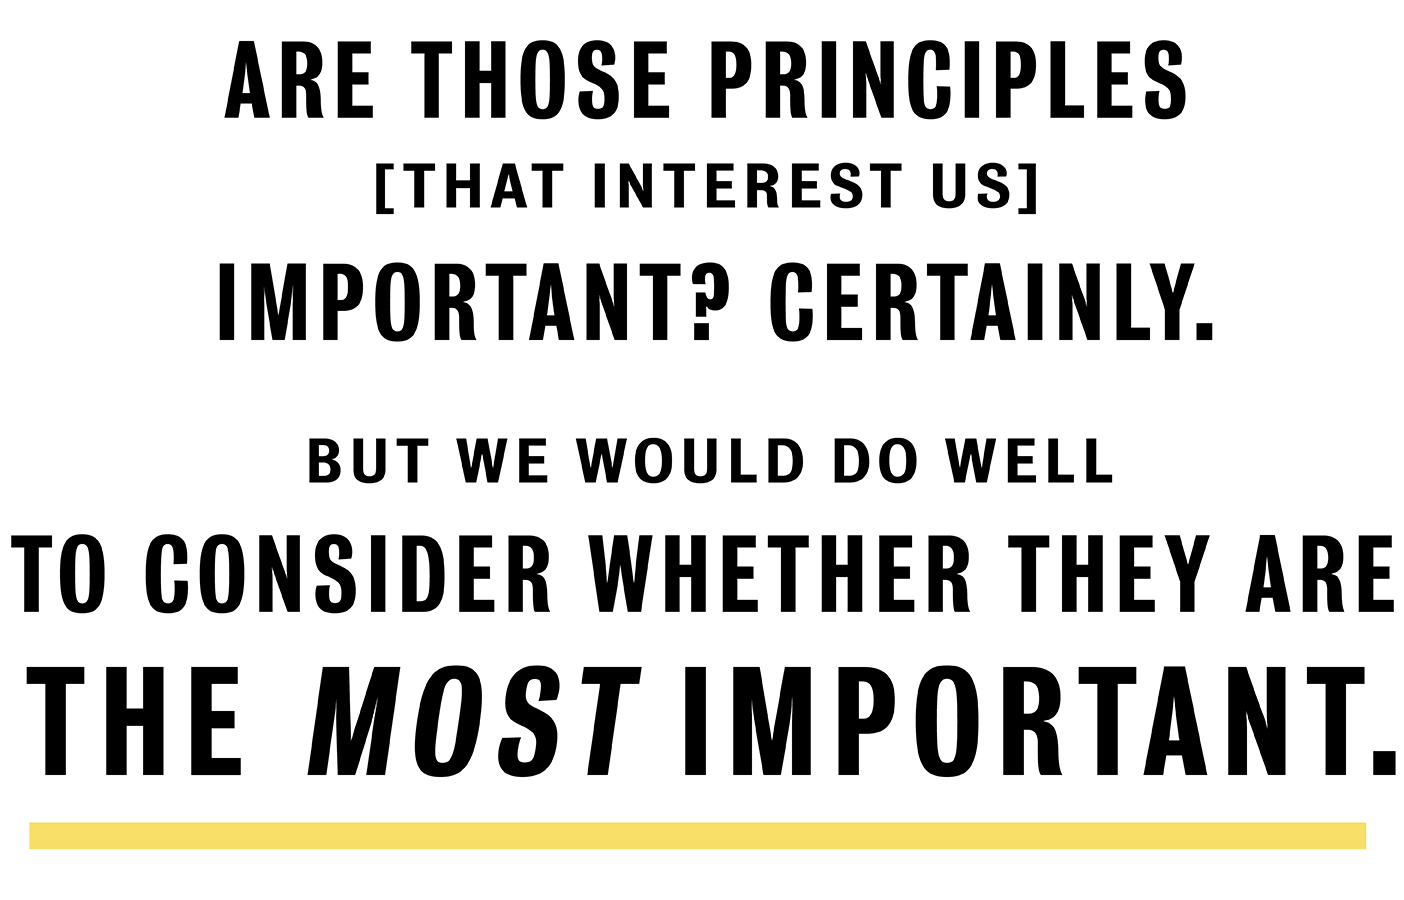 Are those principles important? Certainly. But we would do well to consider whether they are the most important.